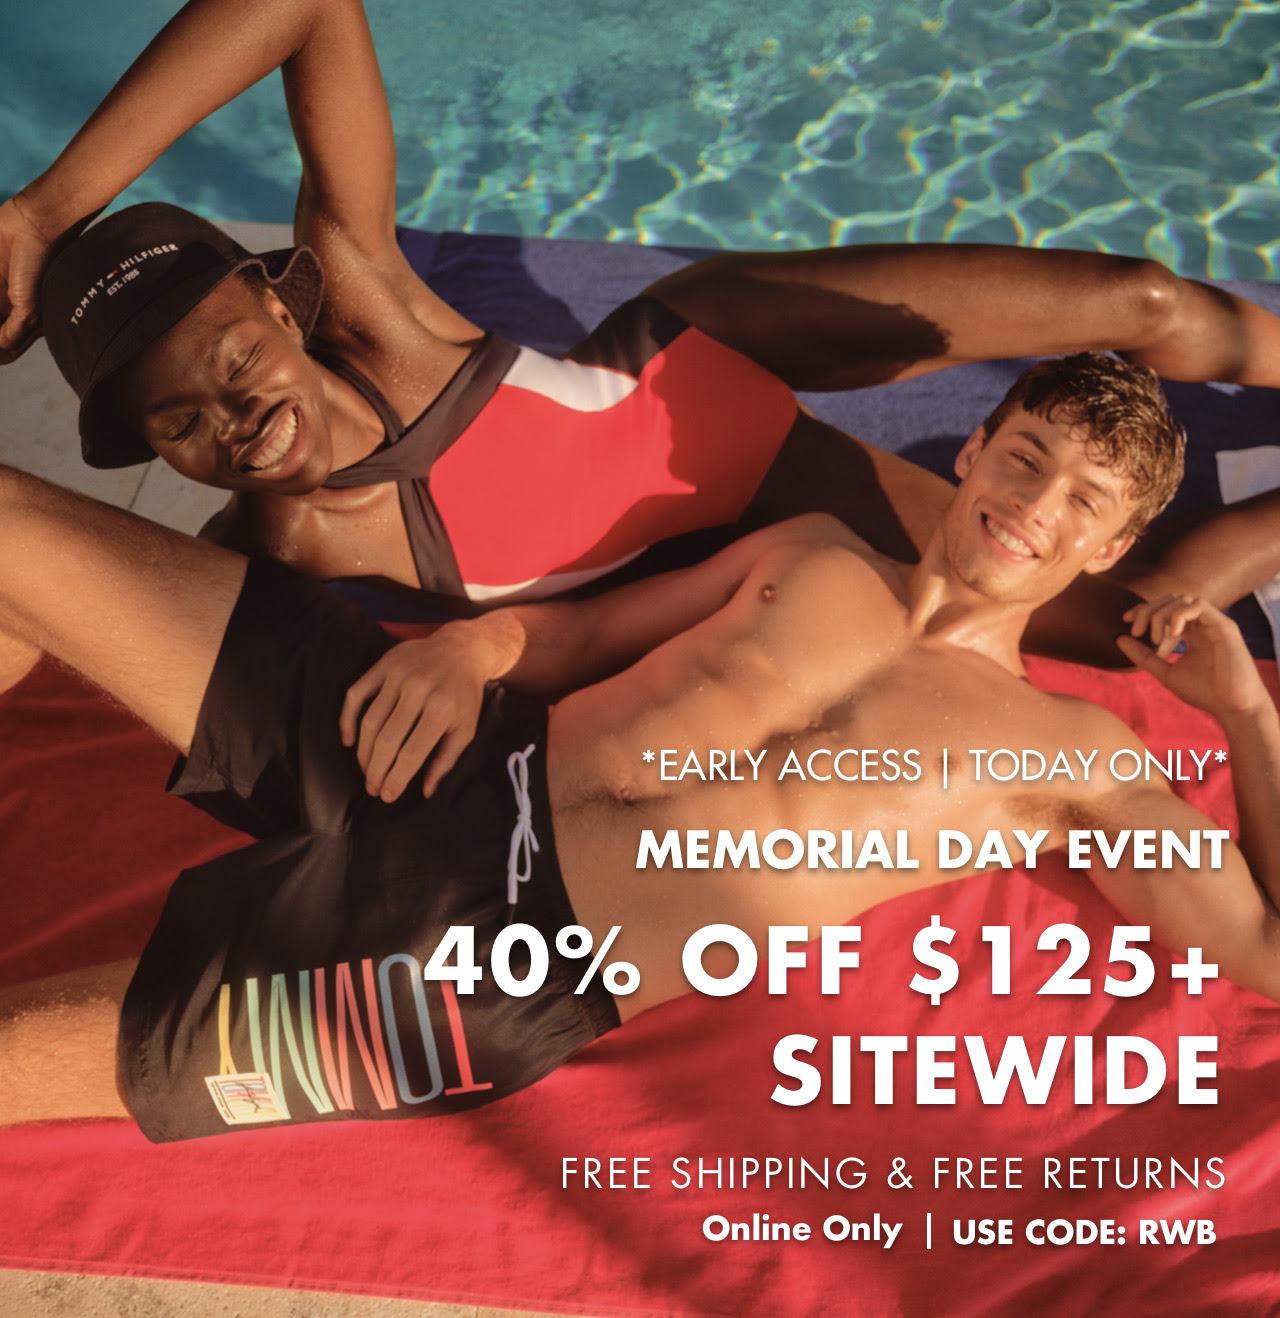 Memorial Day Event: *EARLY ACCESS | TODAY ONLY* Use Code RWB for 40% Off $125+ Sitewide, Free Shipping & Free Returns, Online Only